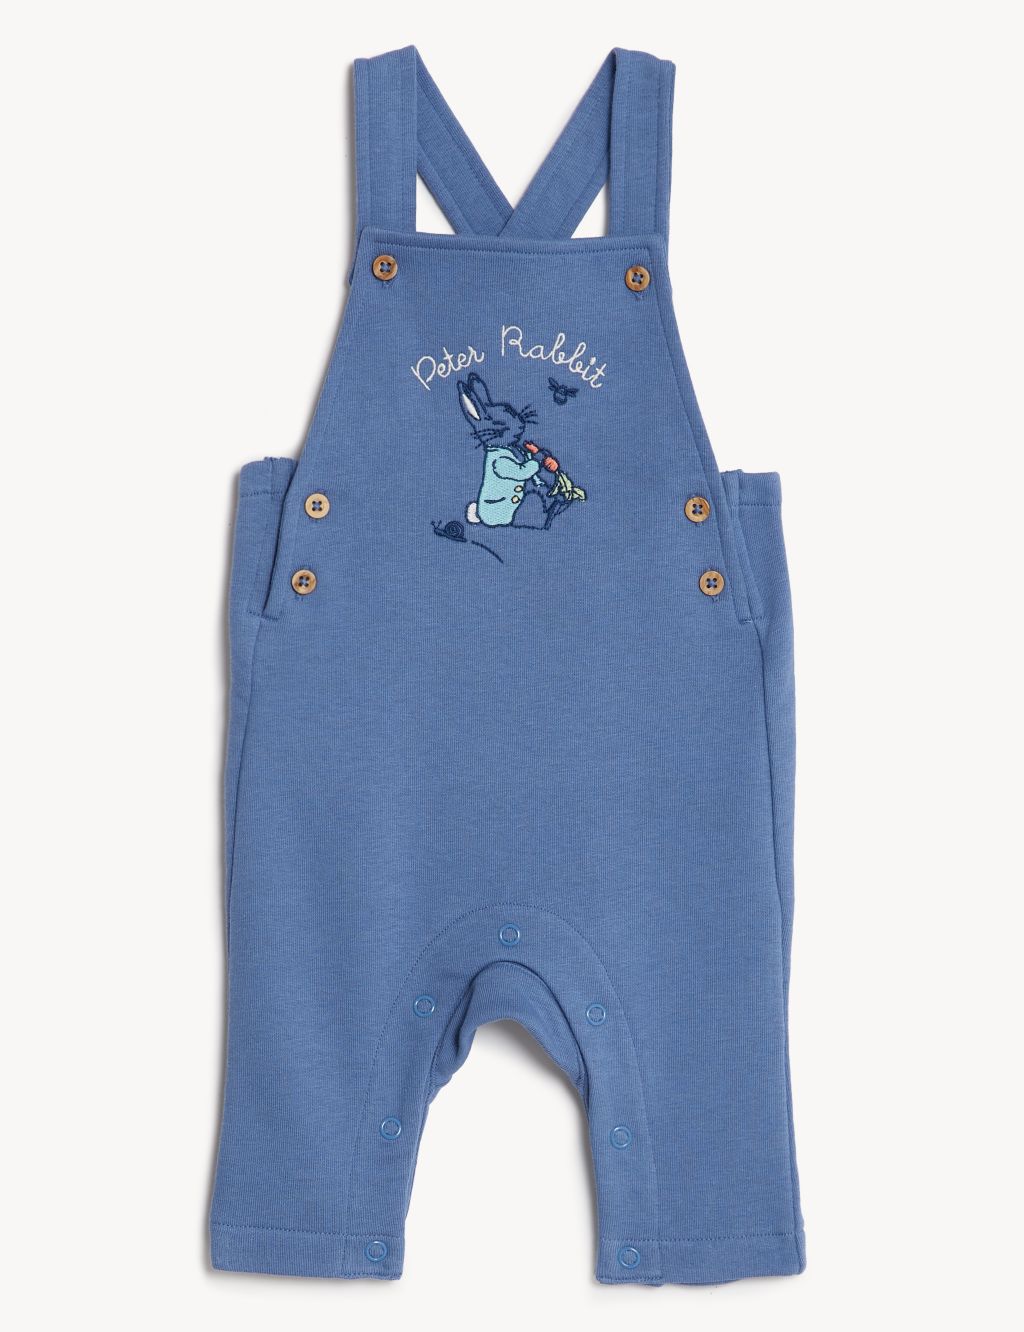 2pc Cotton Rich Peter Rabbit™ Outfit (0-3 yrs) image 3